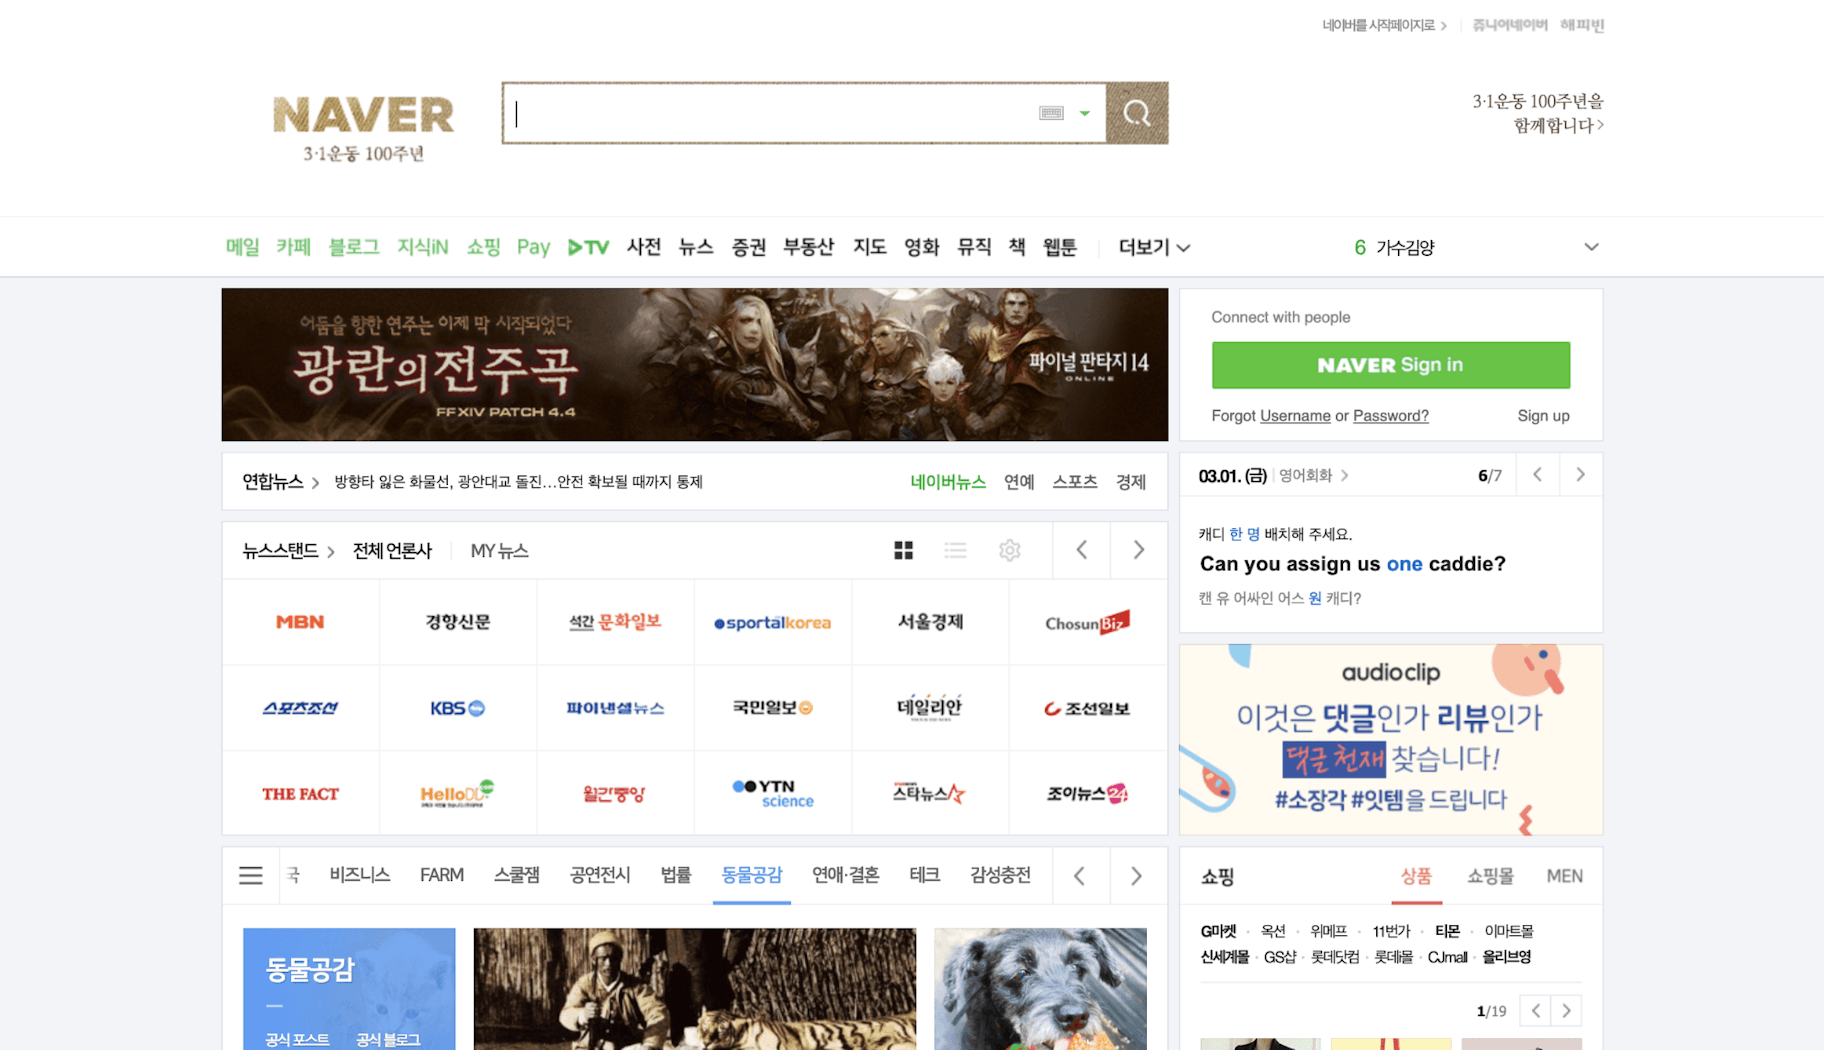 Naver Search Engine